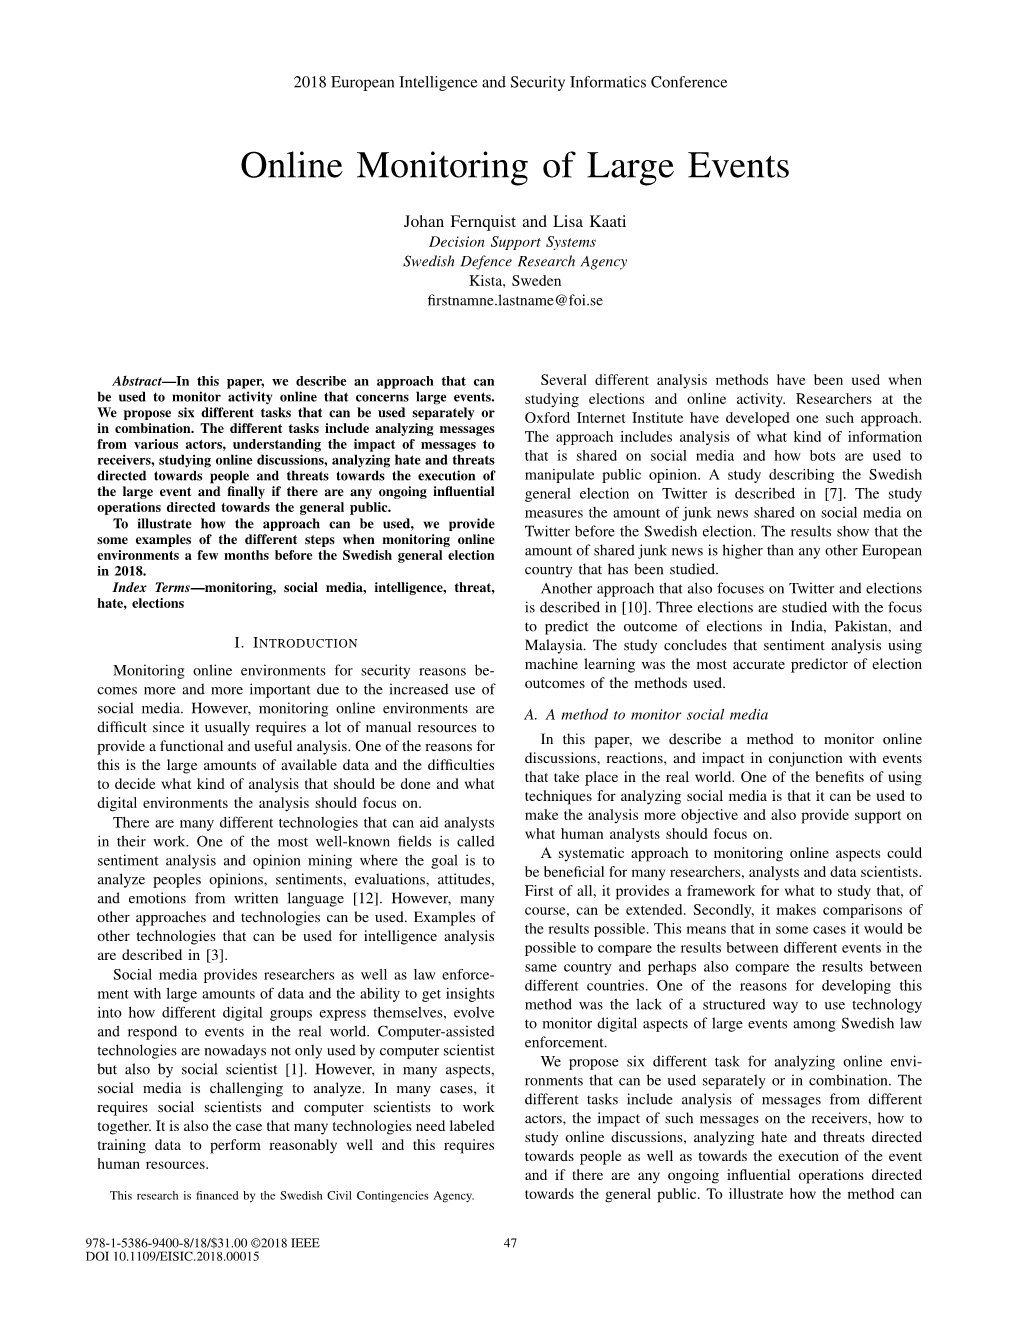 Online Monitoring of Large Events